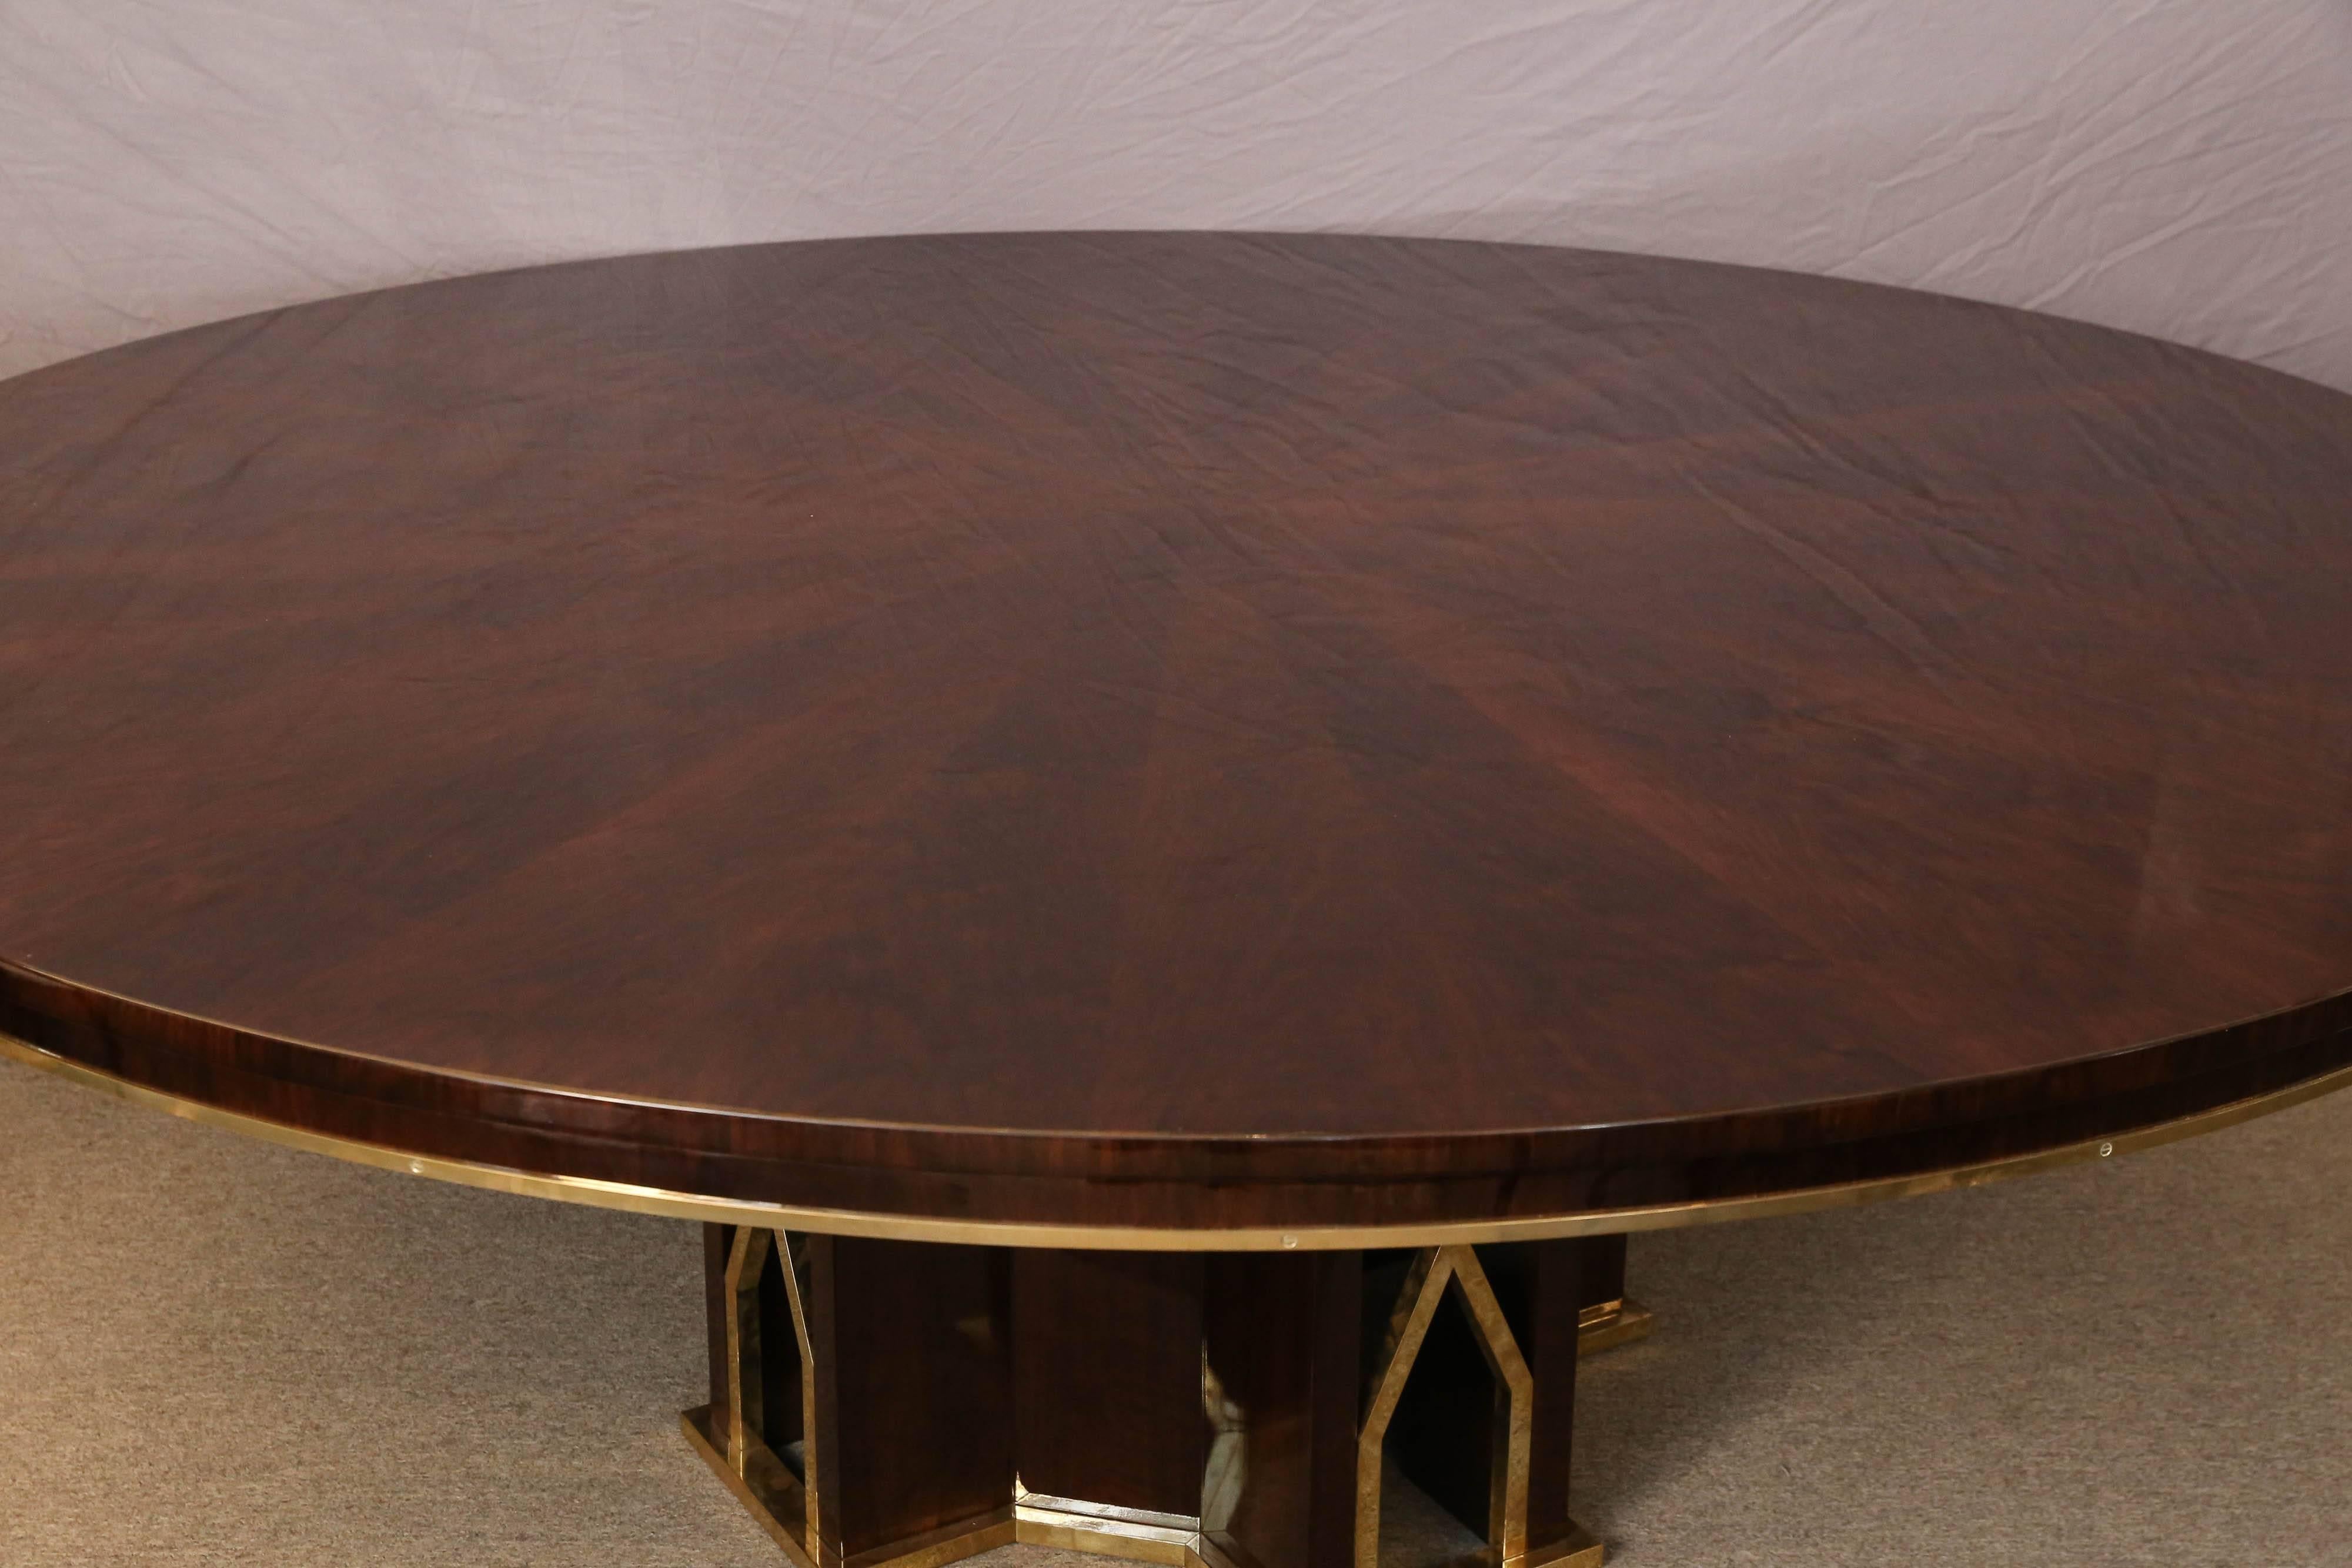 Table has a round table top, that is decorated with brass trimming on the lower edge. It is elevated by the octagonal shape base, that is also embellished with several brass decorative elements. Table can accommodate around ten chairs.

Condition